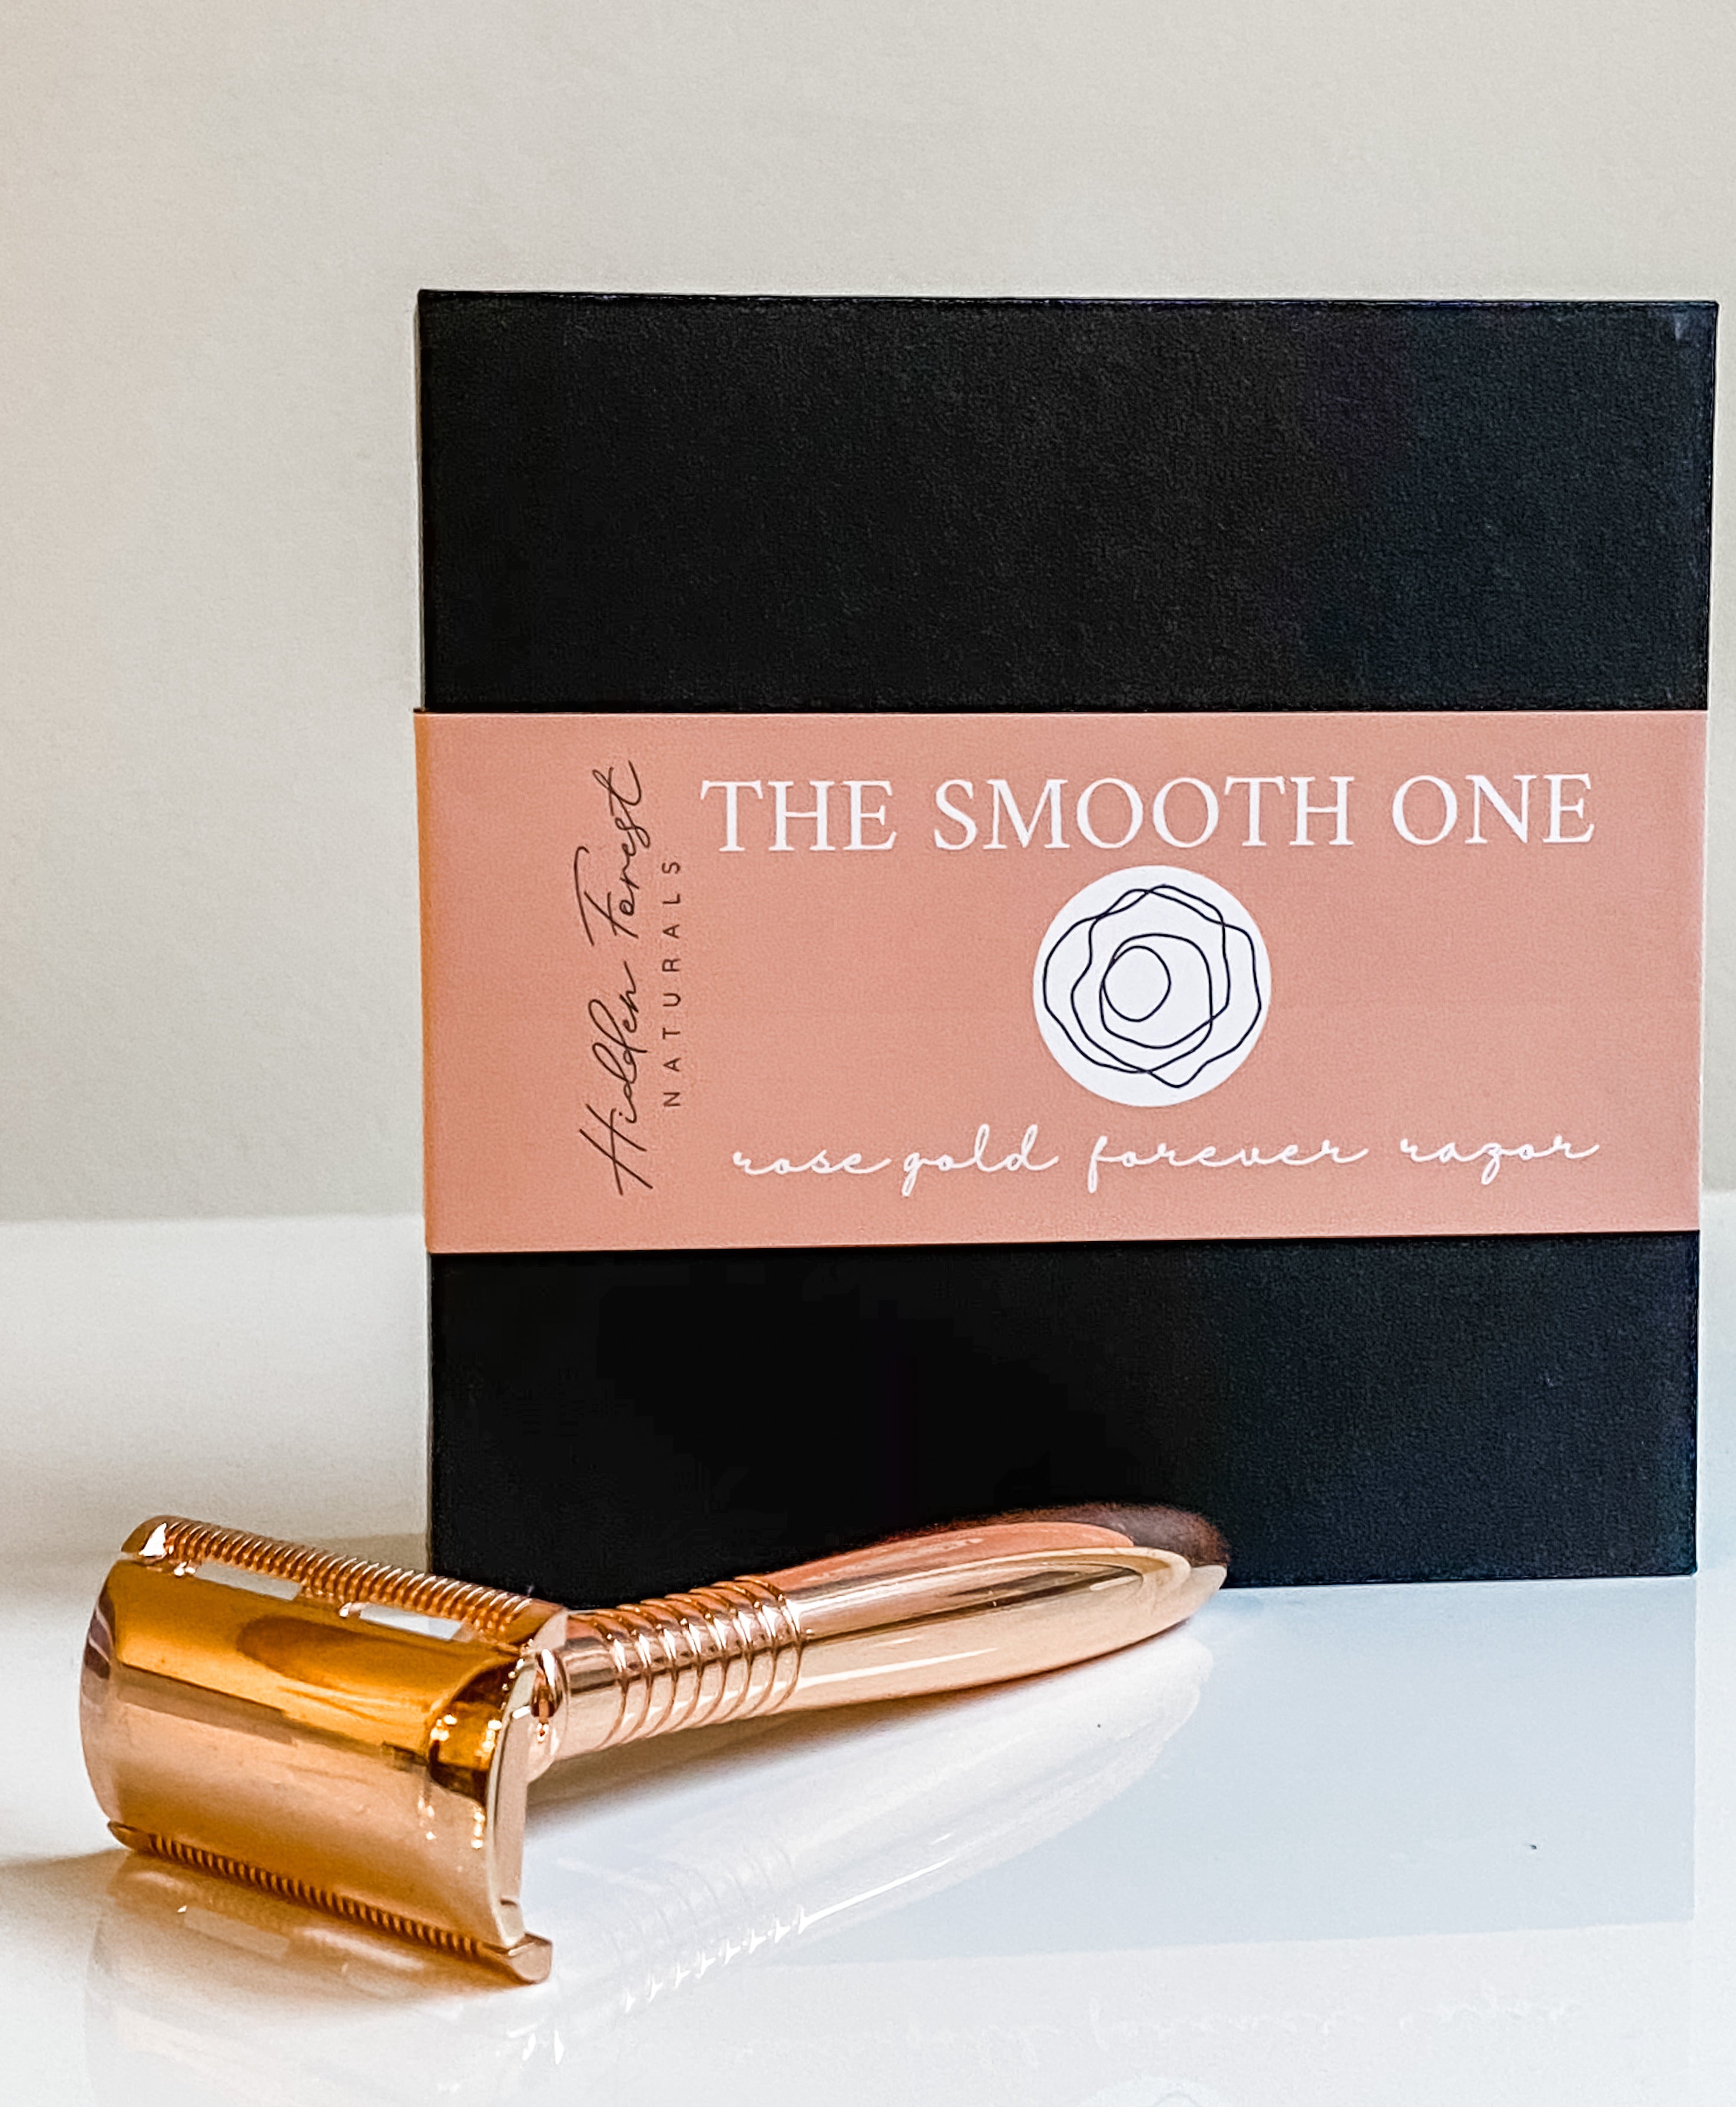 The Smooth One - Reusable Razor - Handmade with Natural Ingredients. Hidden Forest Naturals